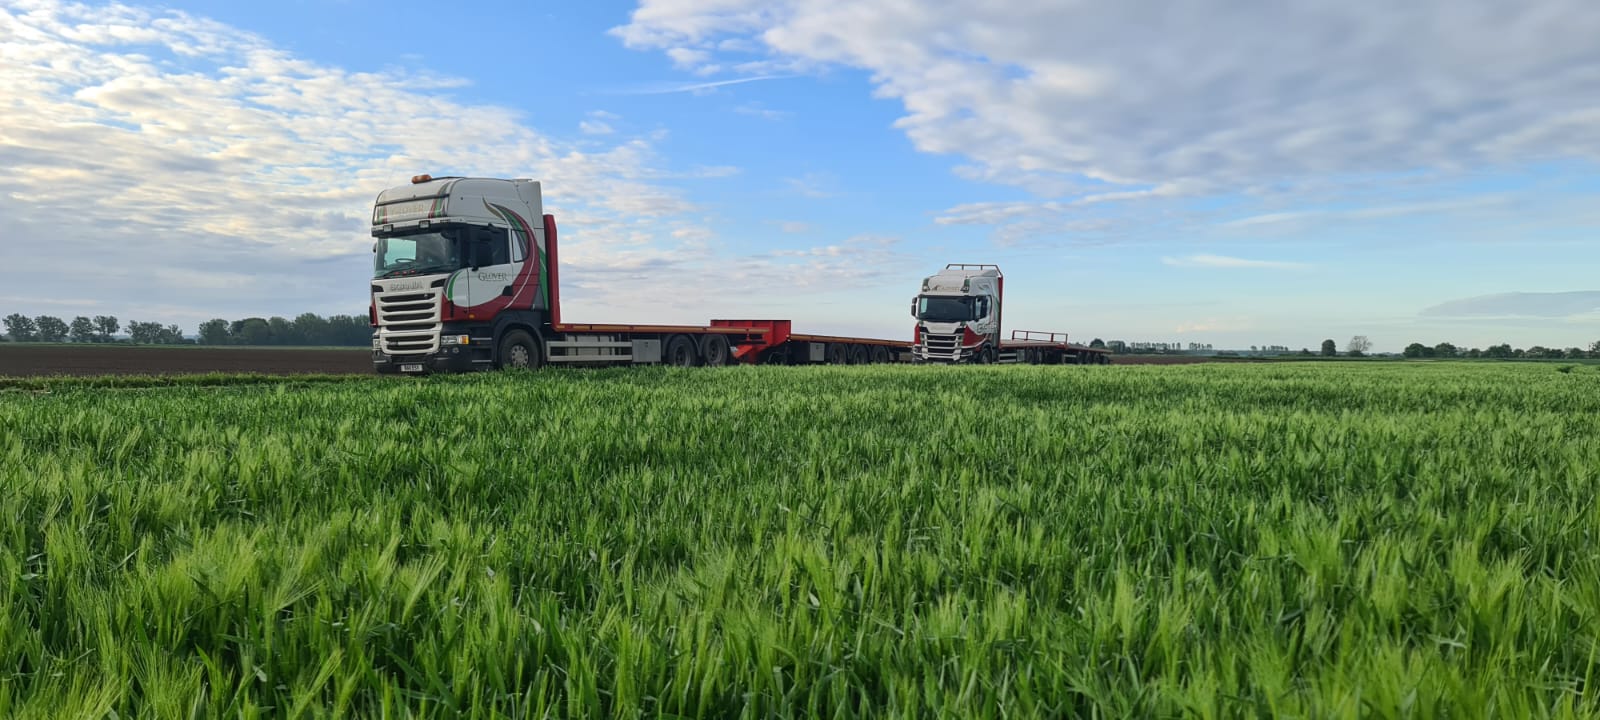 Two Glover lorries parked by the side next to fields